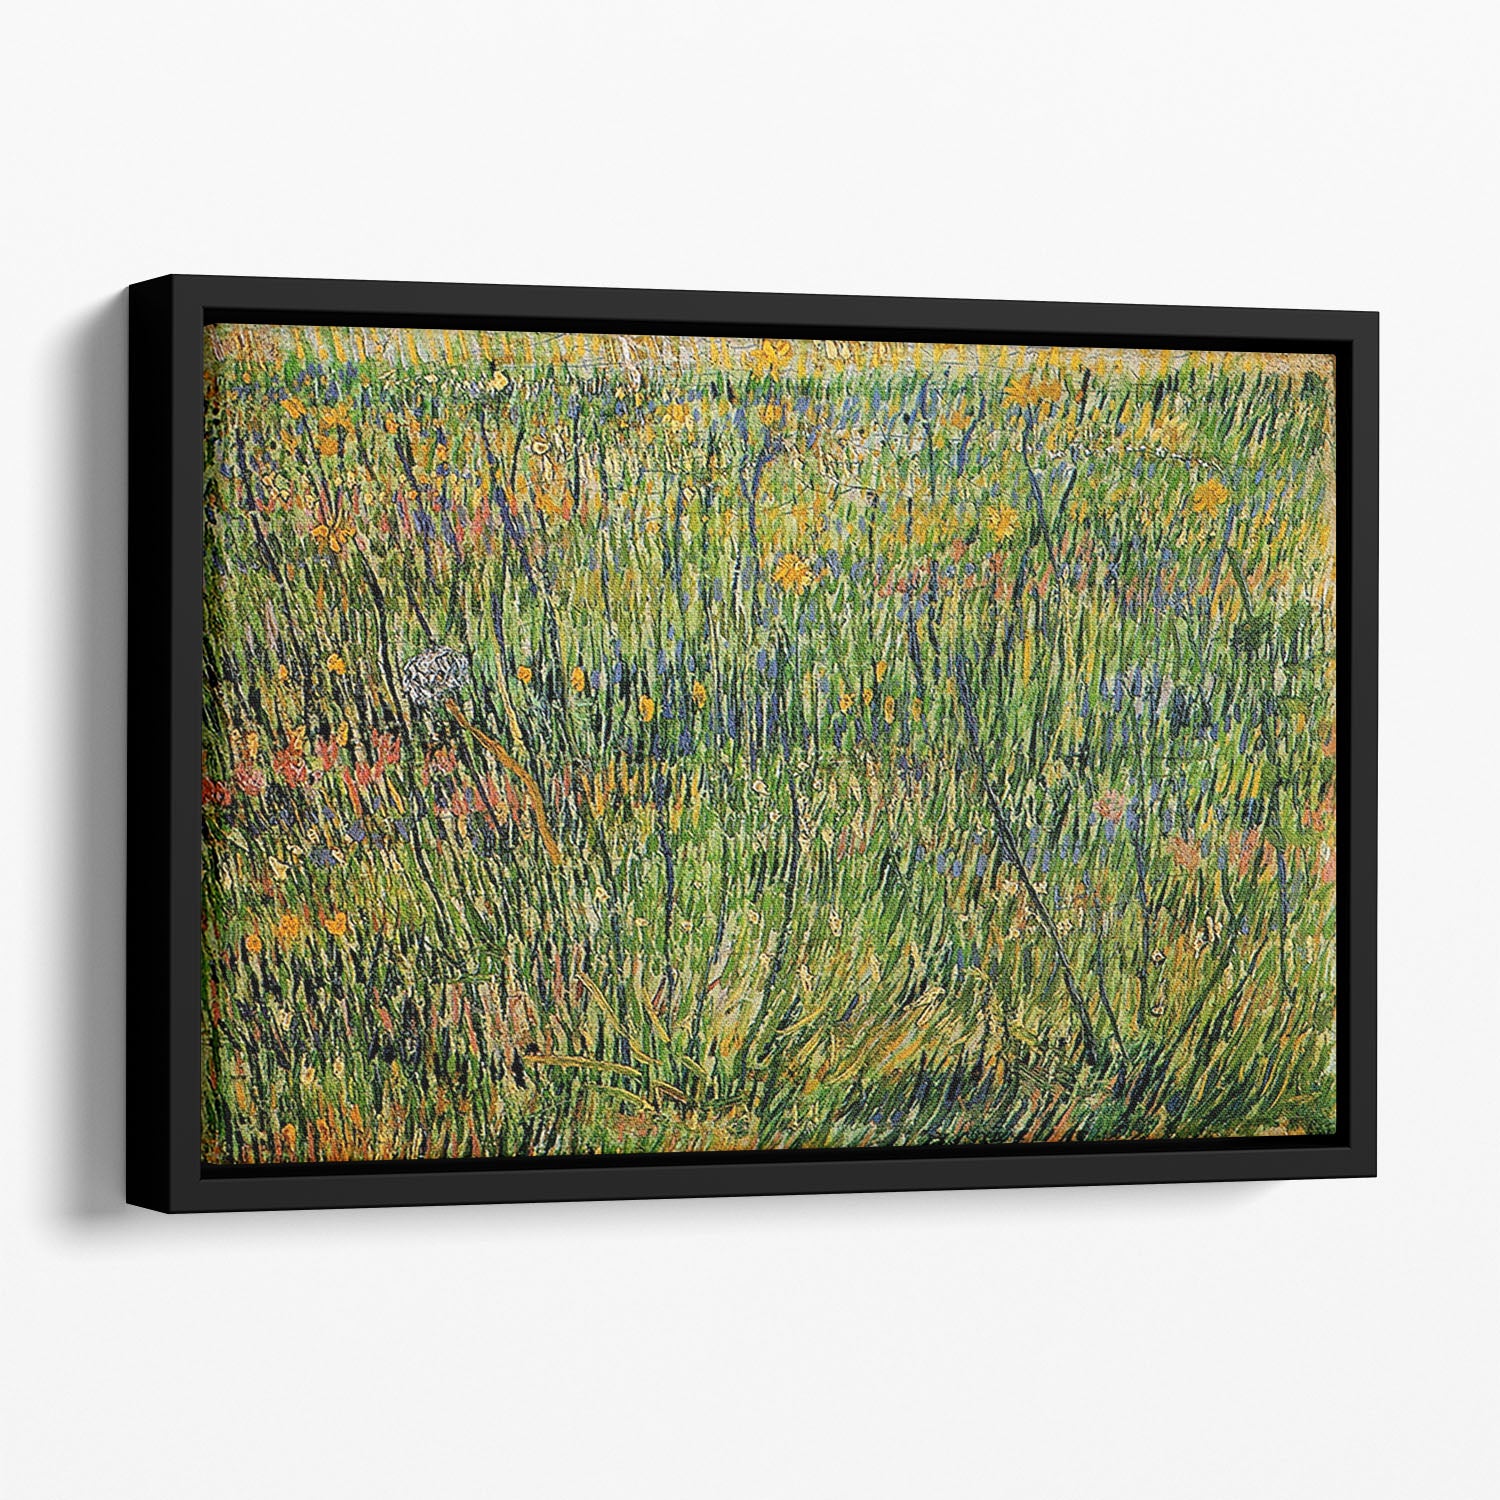 Pasture in Bloom by Van Gogh Floating Framed Canvas